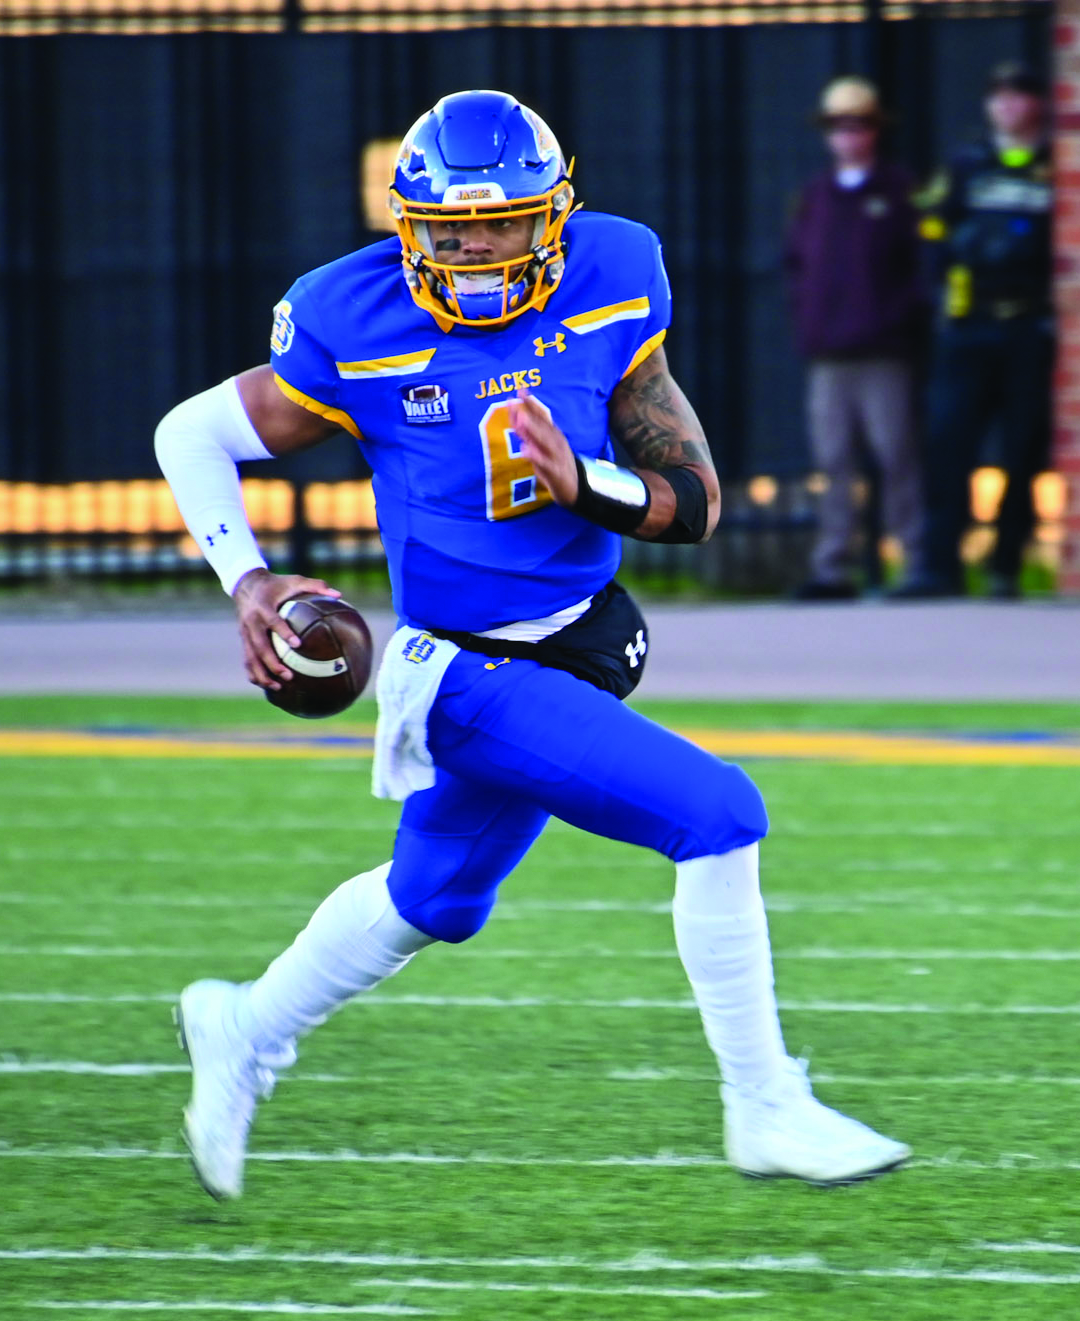 Jacks to face Youngstown State